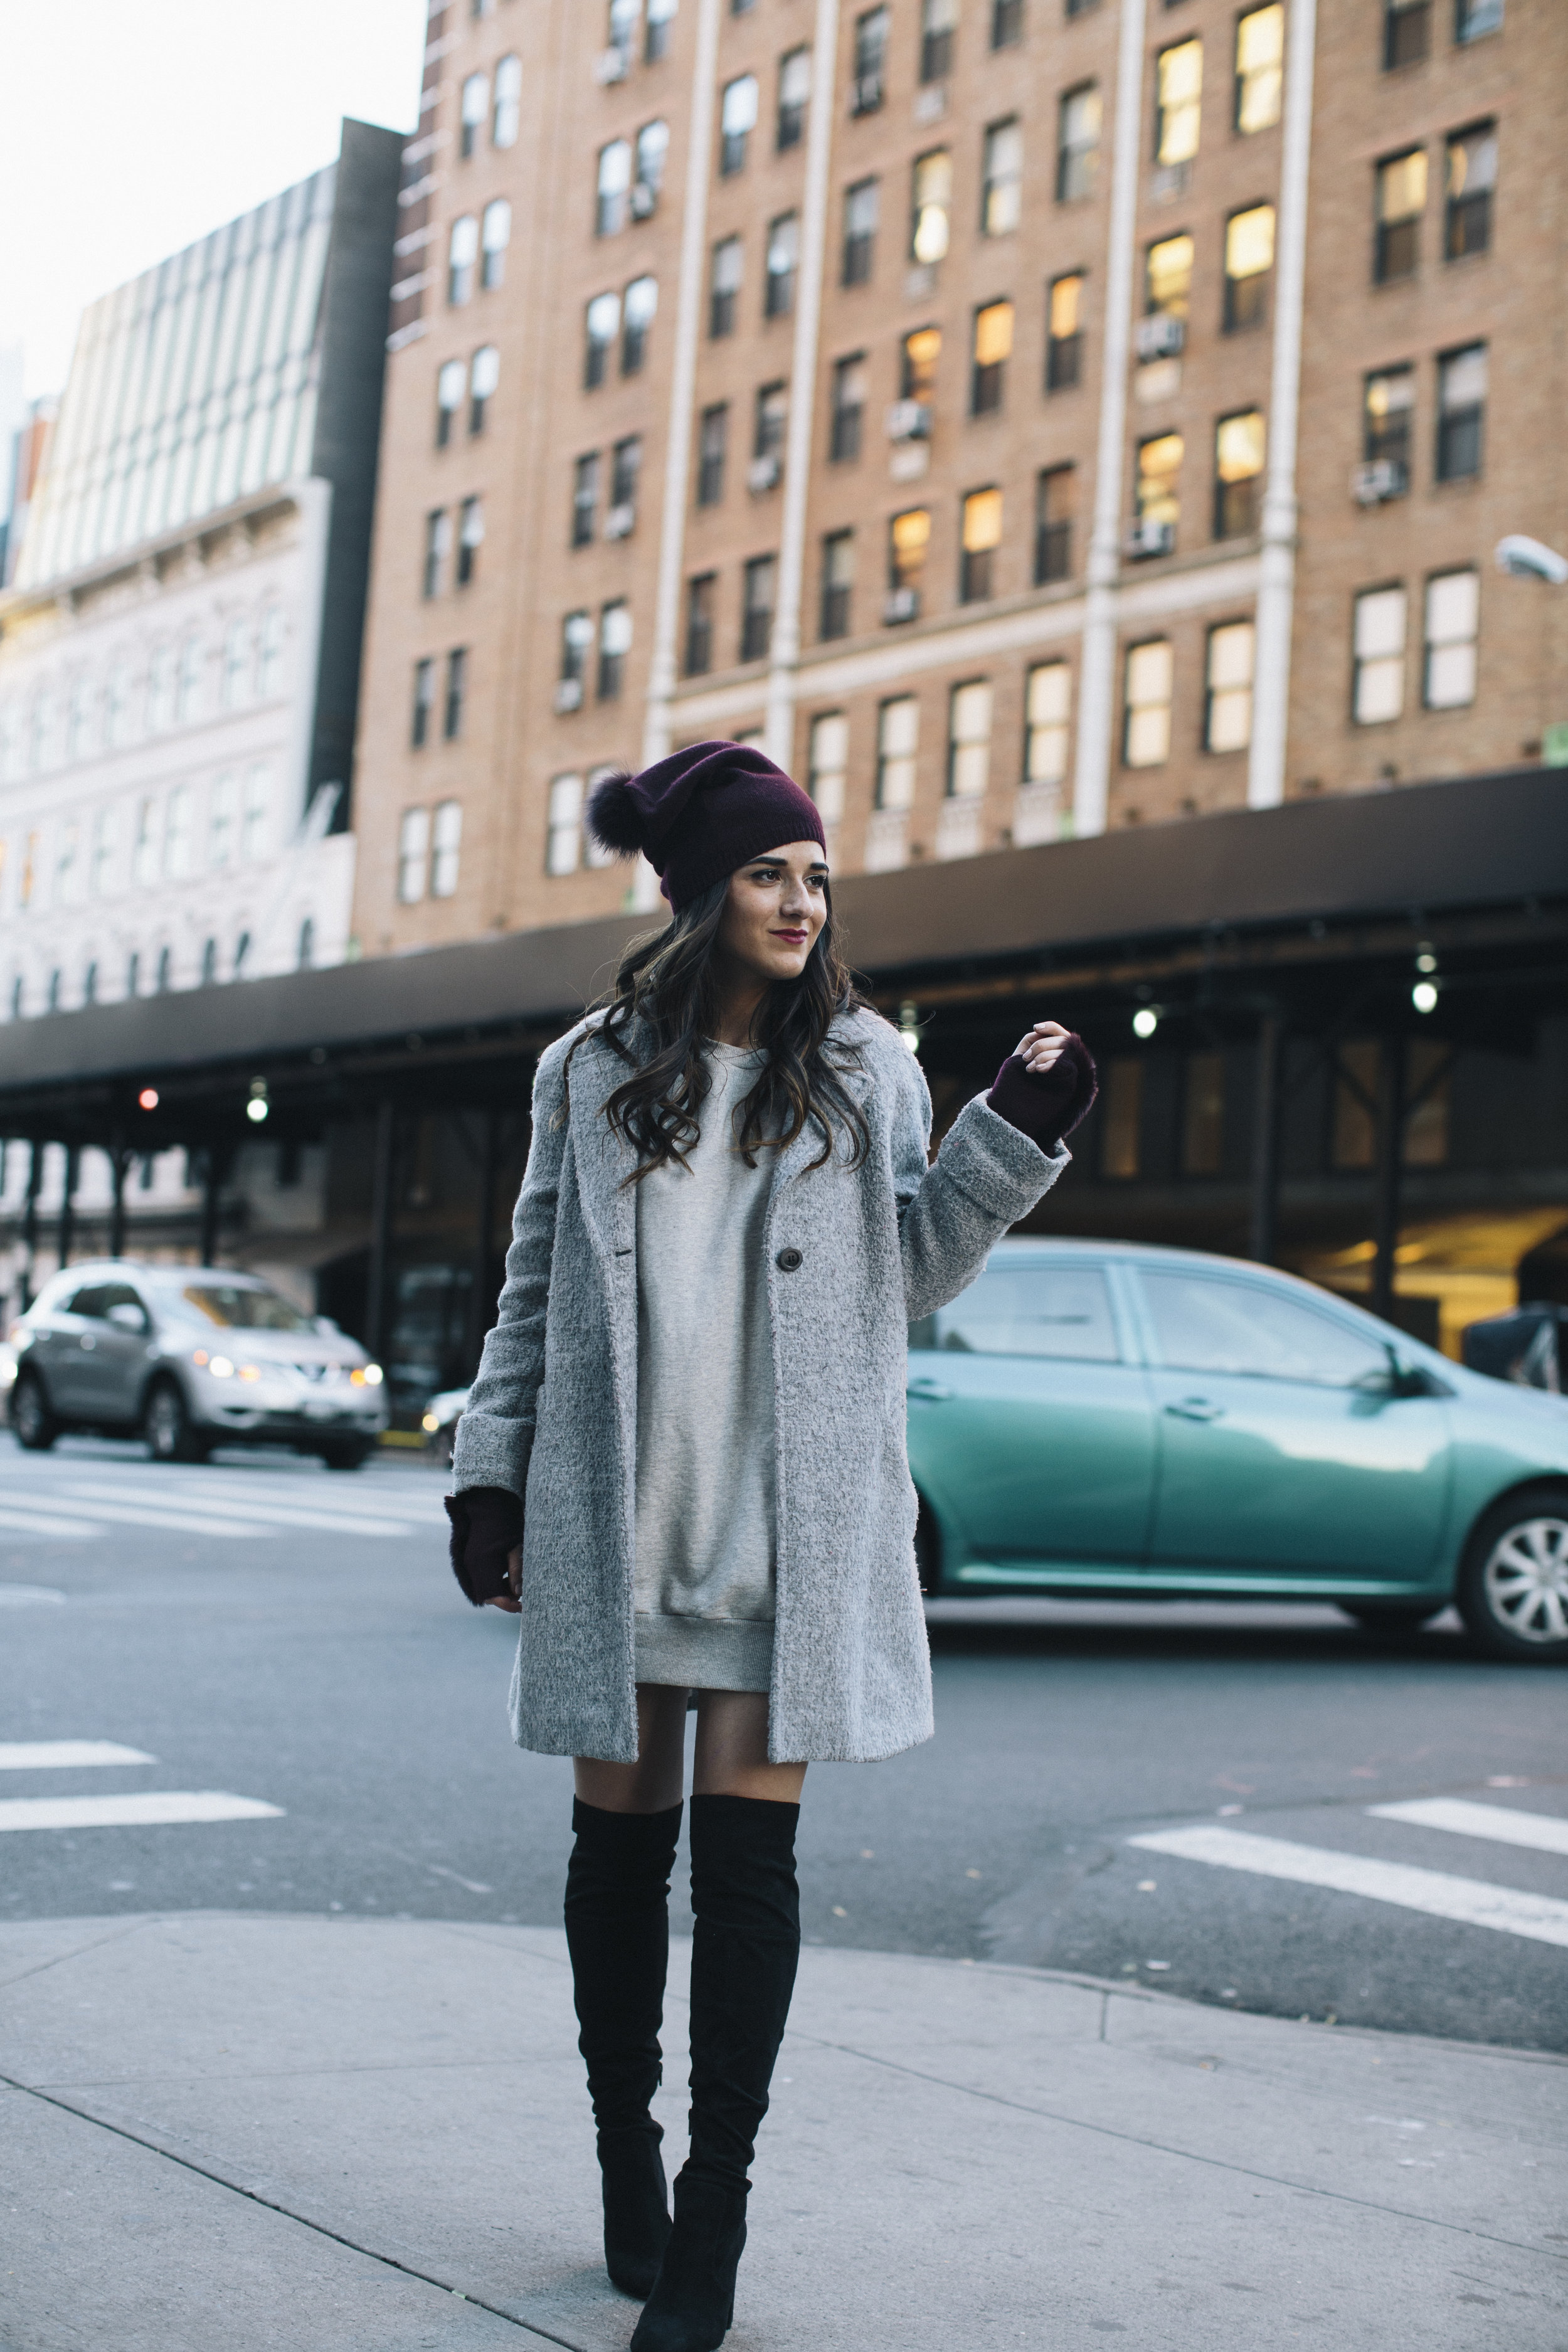 Cashmere Hat And Glove Set Piccolo New York Louboutins & Love Fashion Blog Esther Santer NYC Street Style Blogger Outfit OOTD Trendy Winter Wear Cold Weather Online Shopping Holiday Season Grey Coat Zara Sweatshirt Dress OTK Black Boots Women Buy Cozy.jpg